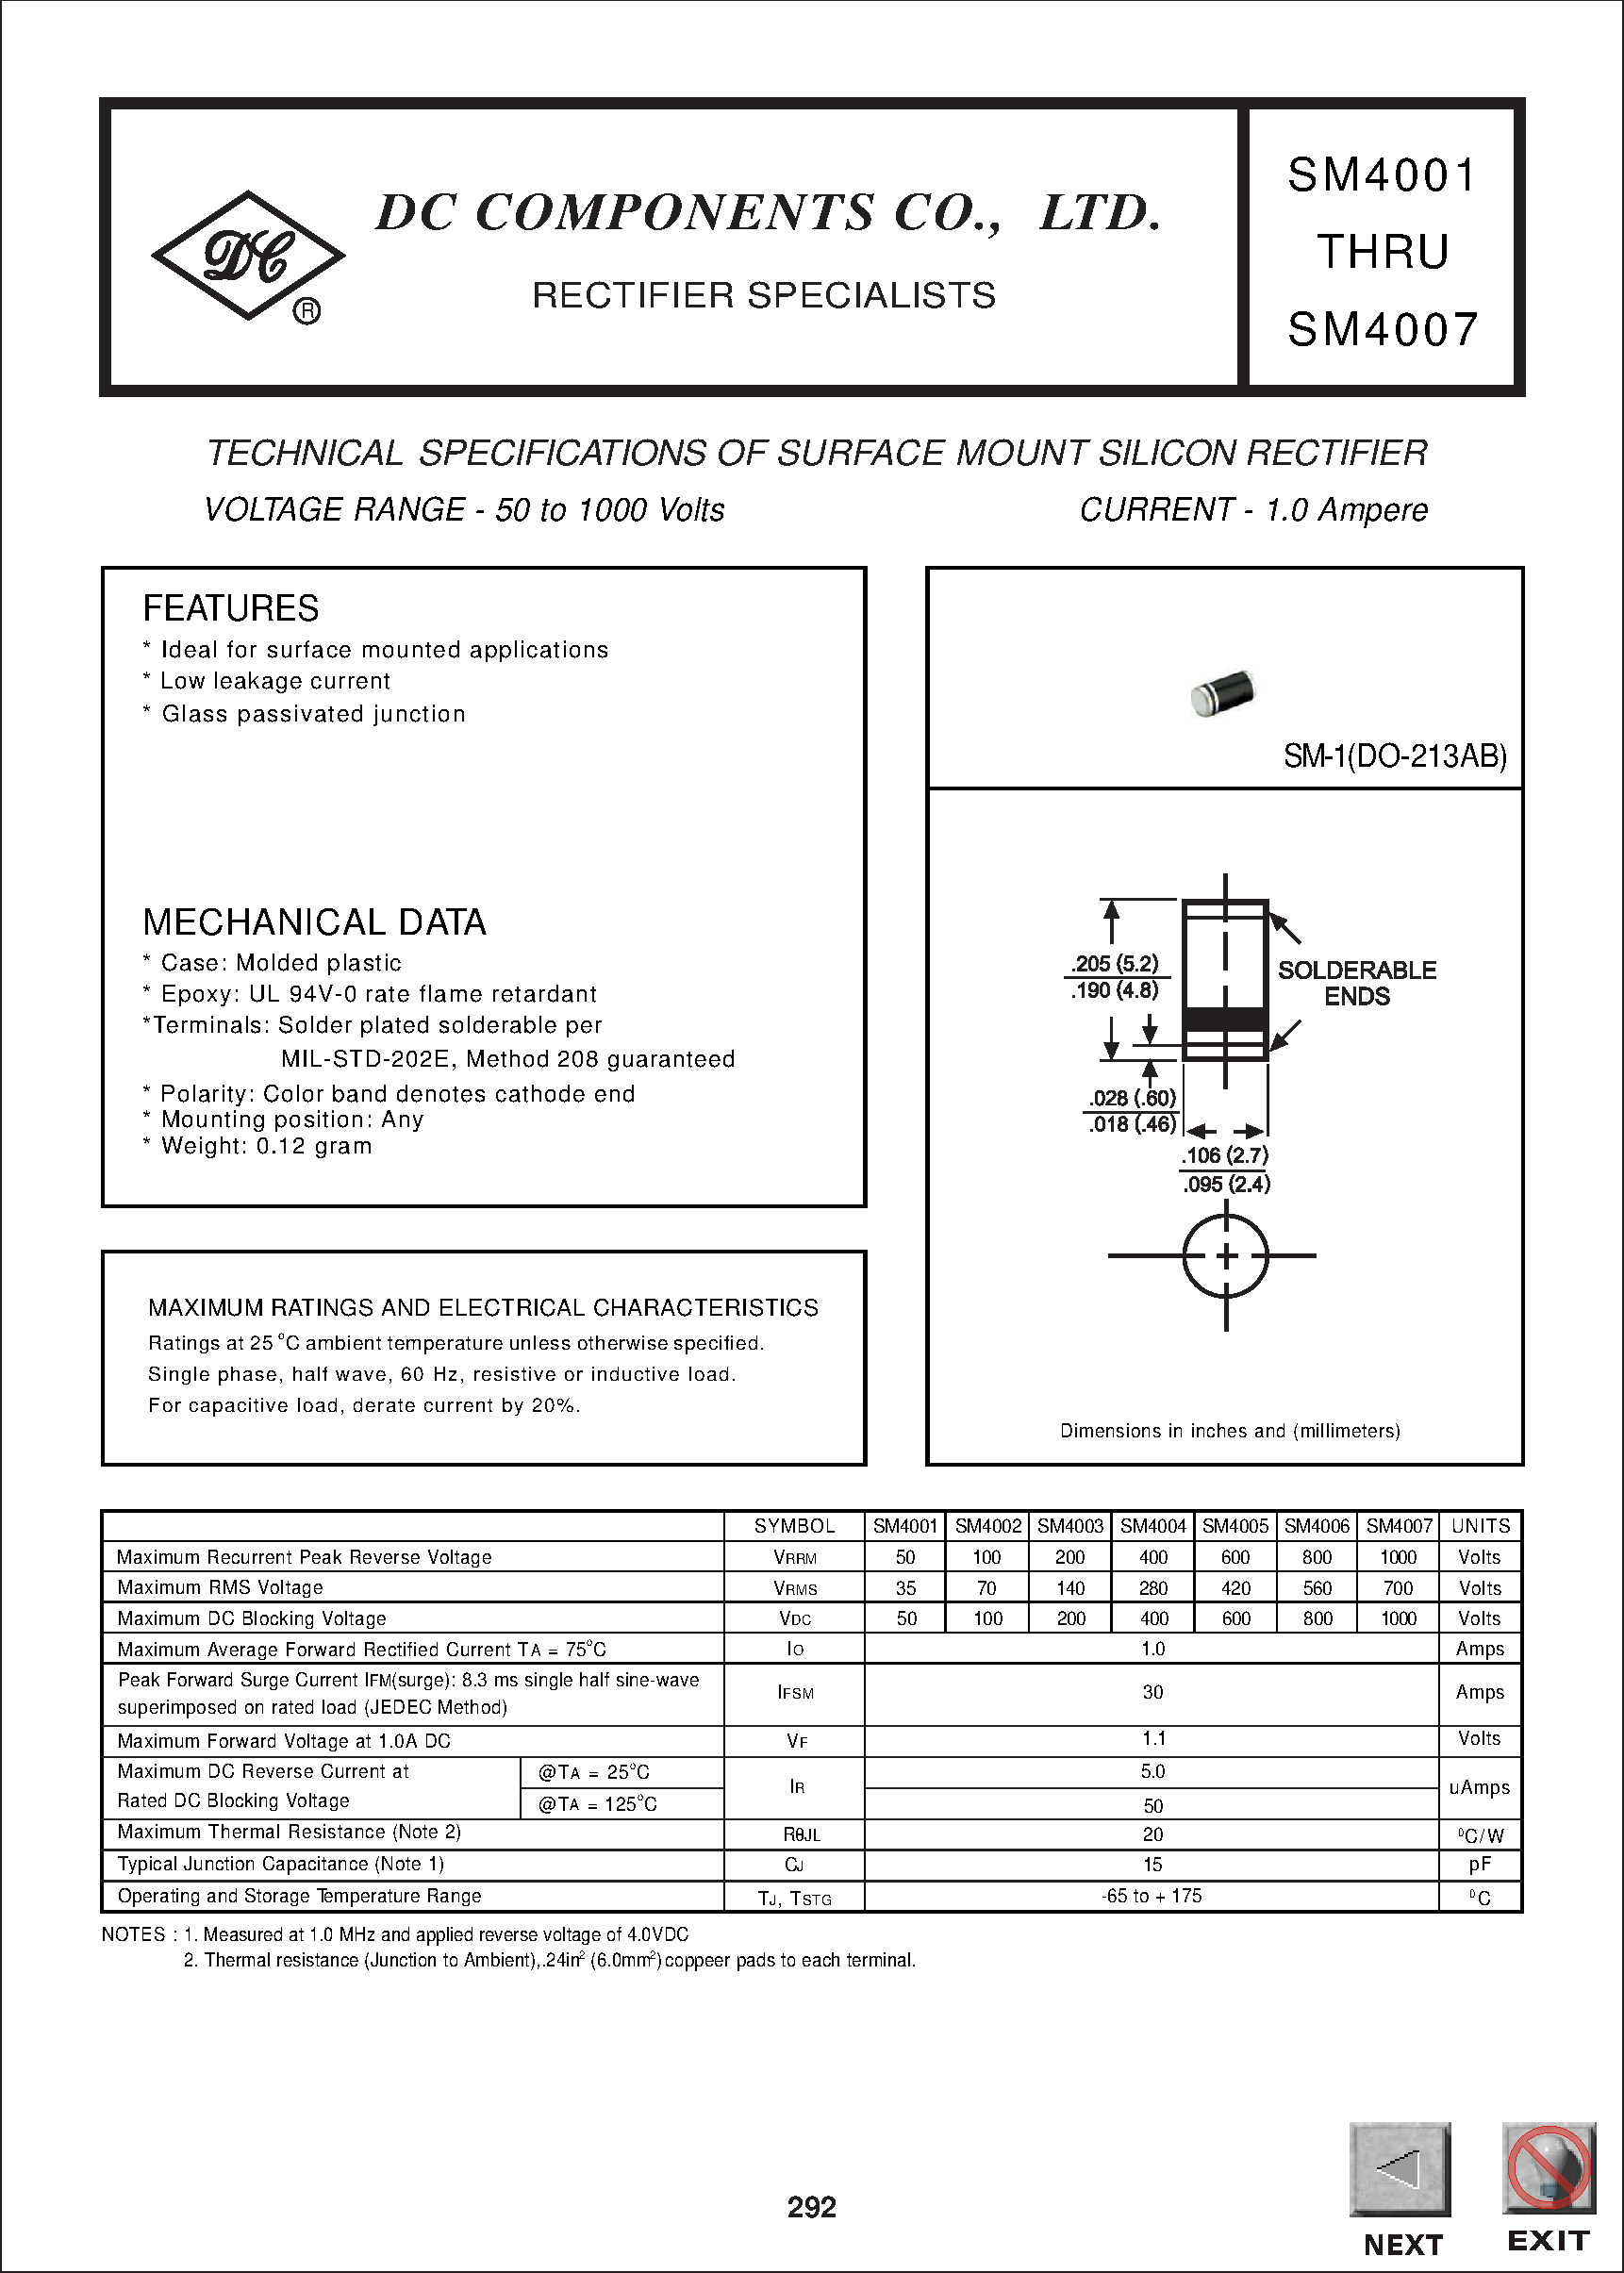 Даташит SM4001 - TECHNICAL SPECIFICATIONS OF SURFACE MOUNT SILICON RECTIFIER страница 1